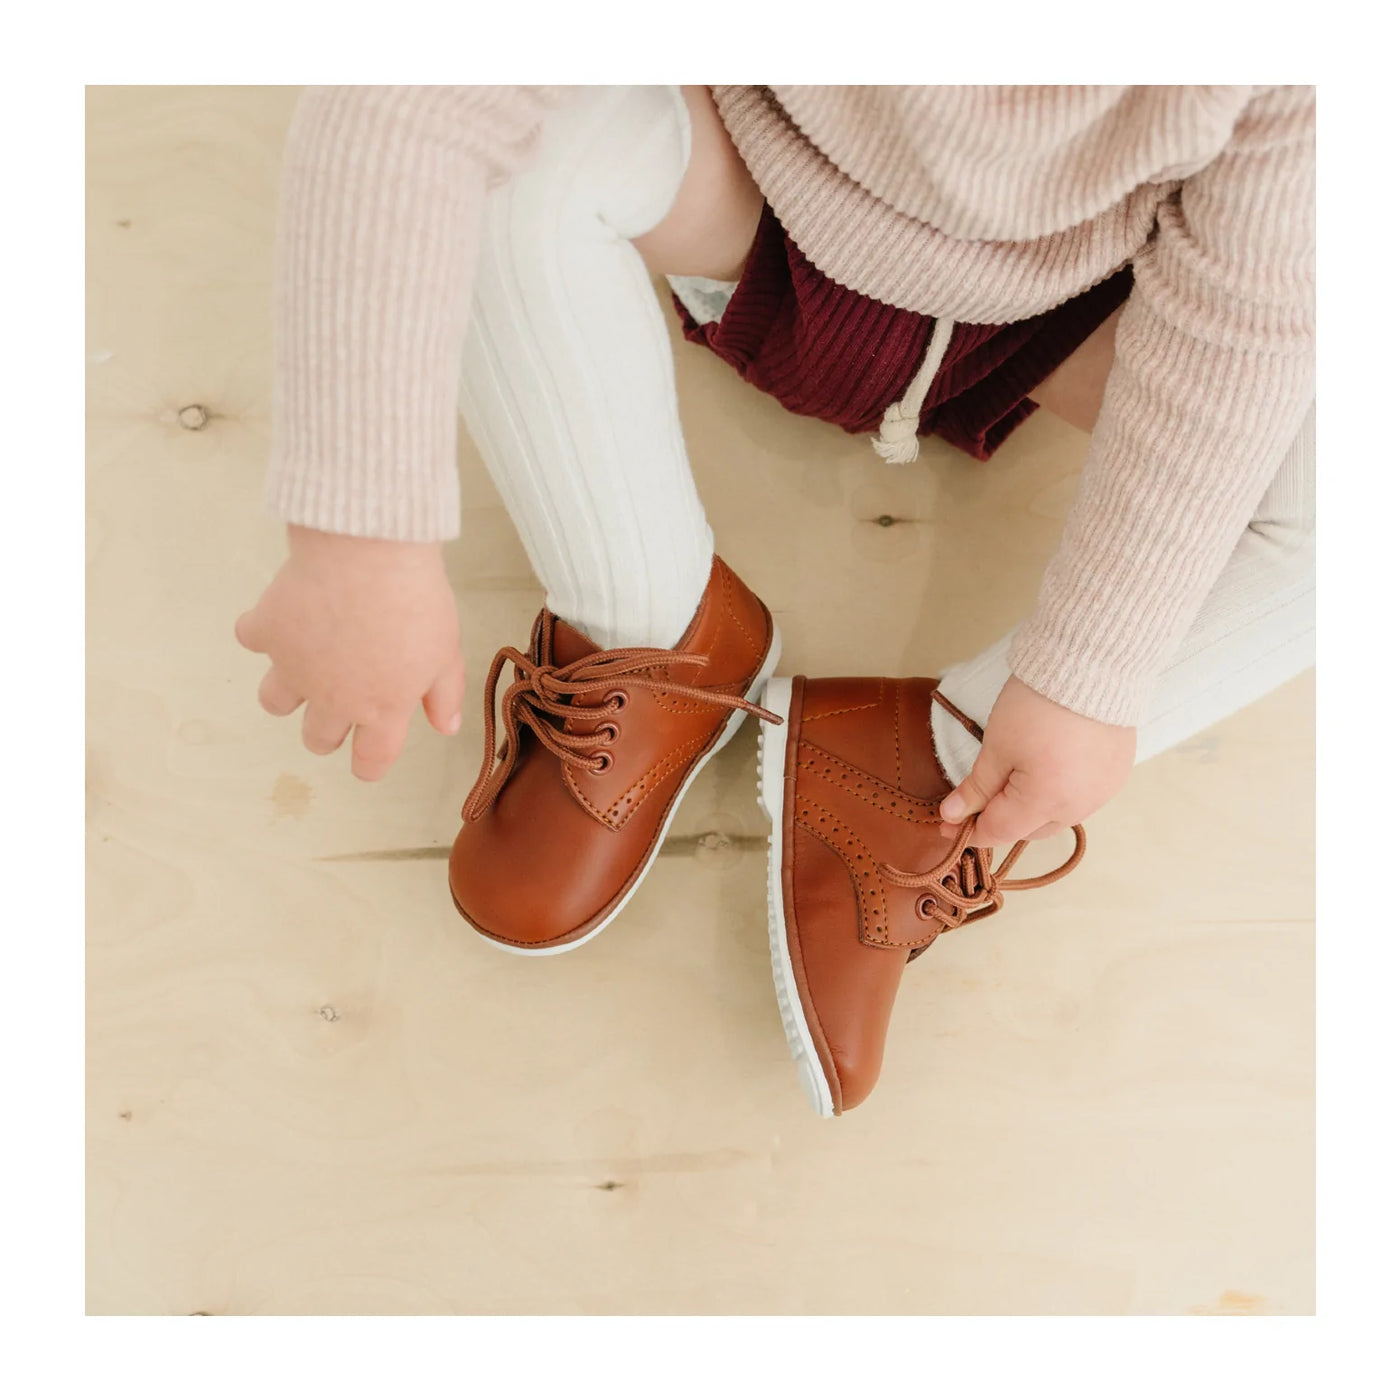 James Leather Lace Up Shoe (Baby)